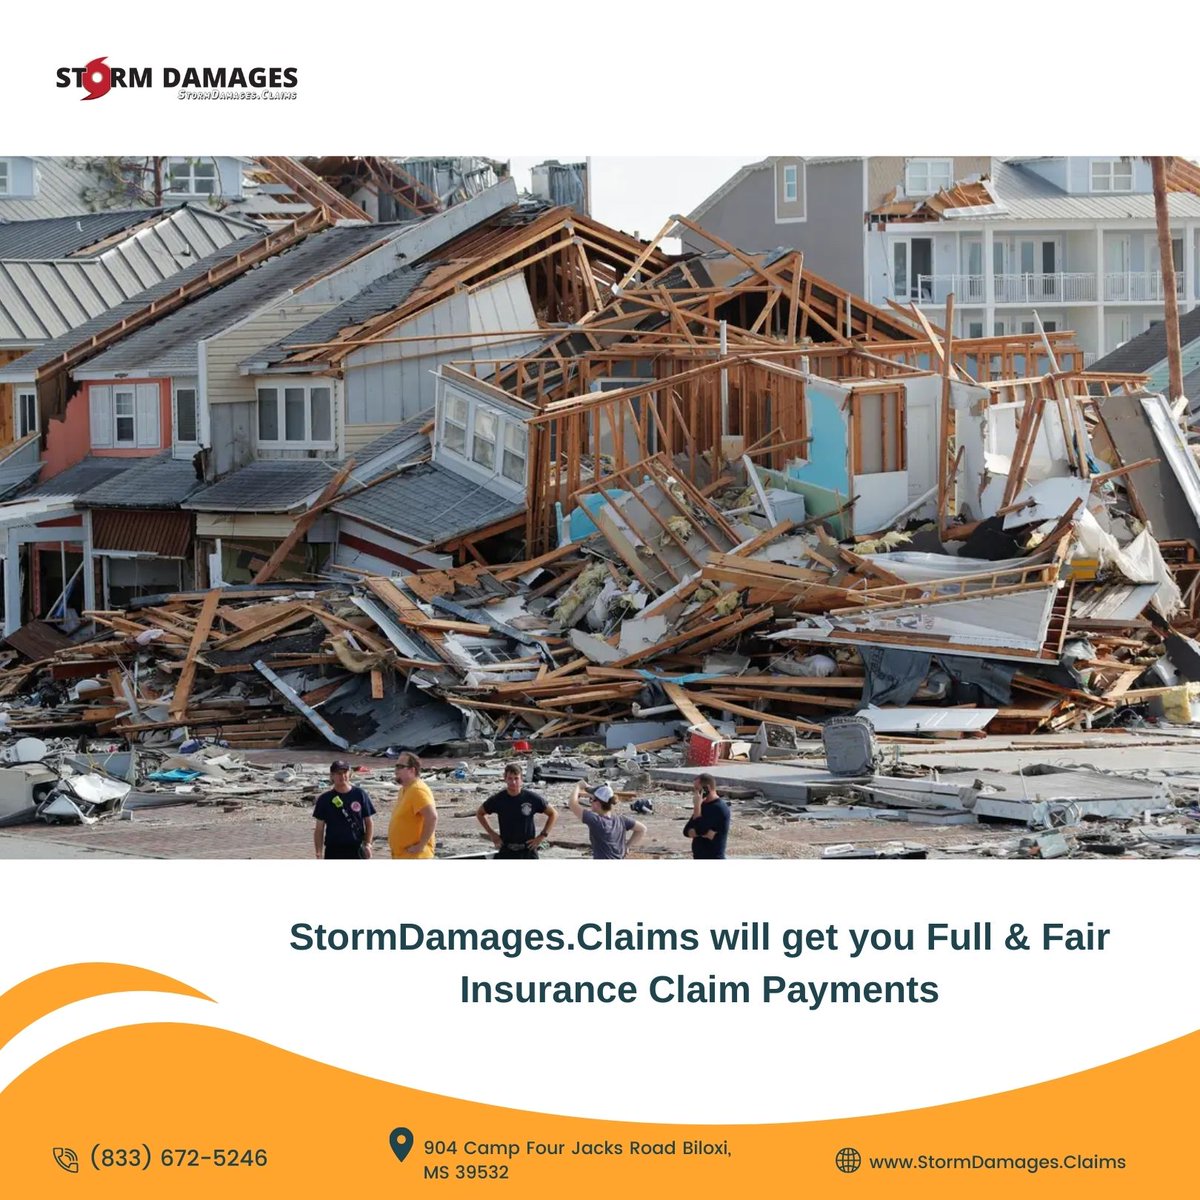 StormDamages.Claims will get you Full & Fair Insurance Claim Payments #stormdamages #tornadoes #floods #hurricanes #InsuranceCompany #commercialinsurance #insuranceloss #securetheproperty #lawyer #insurance #Insuranceclaims #FireDamage #FloodDamage #WaterDamage